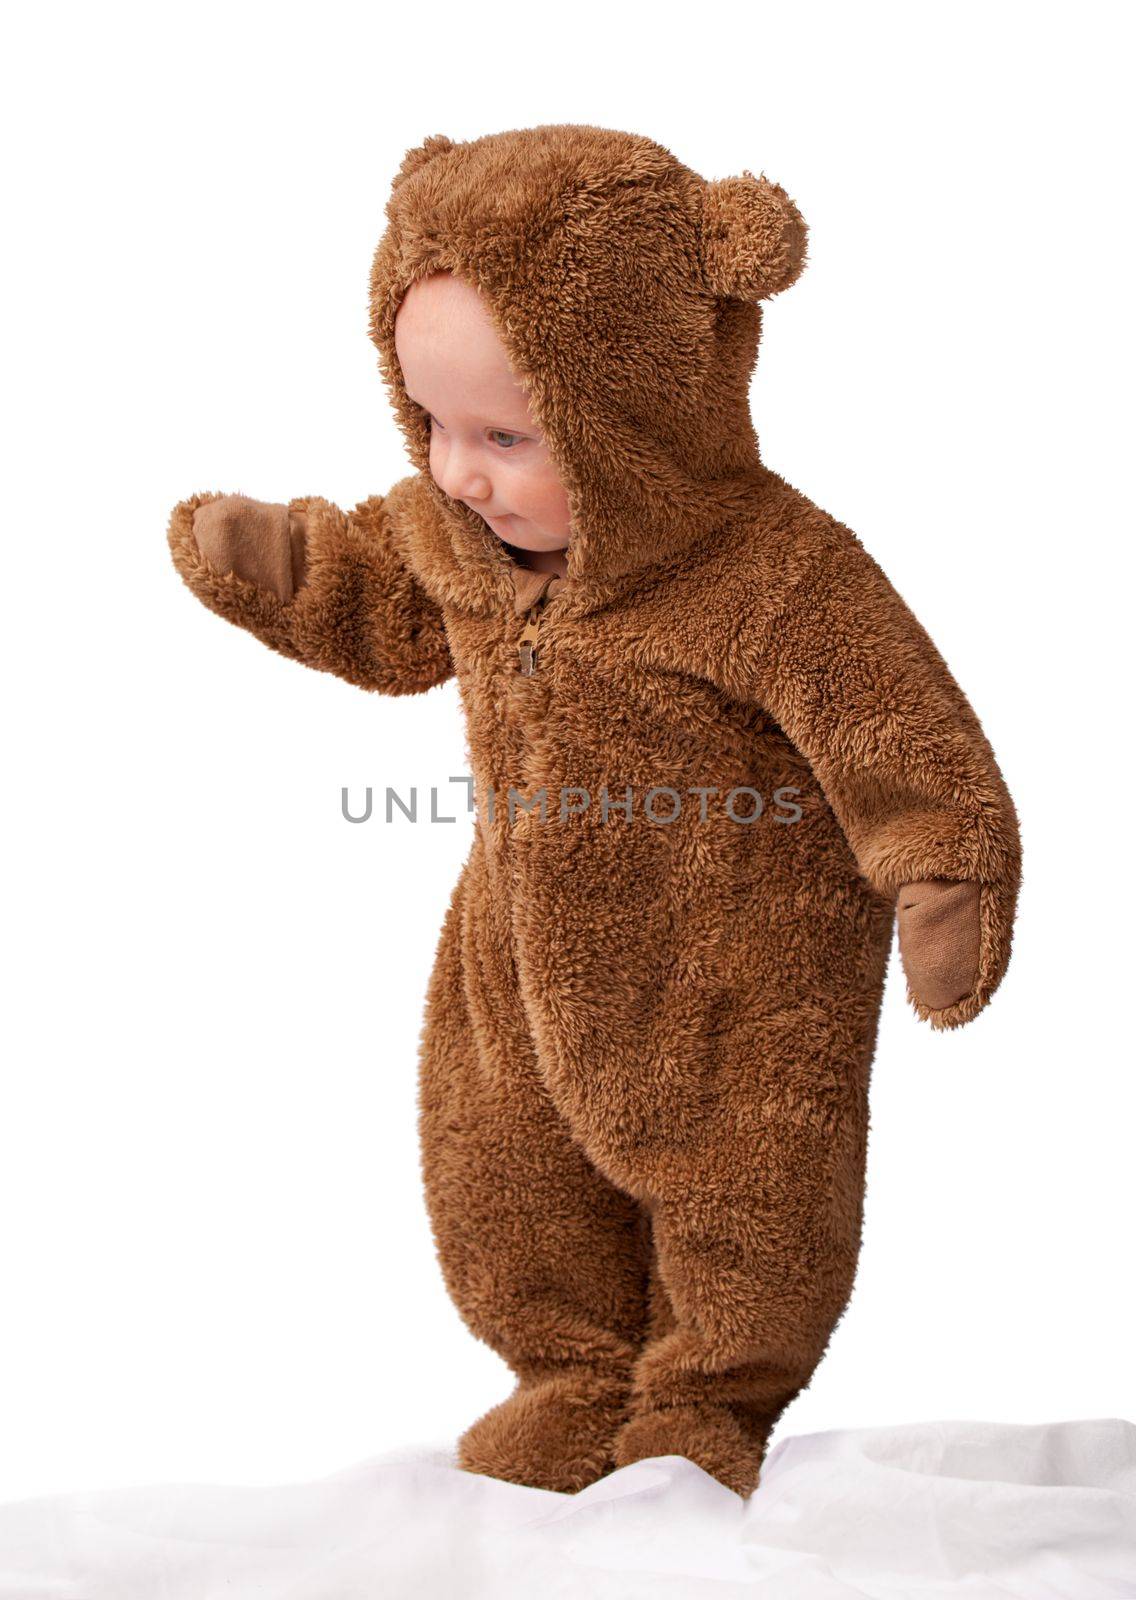 Teddys have never been cuter. Studio shot of a little boy dressed up as a teddy bear. by YuriArcurs